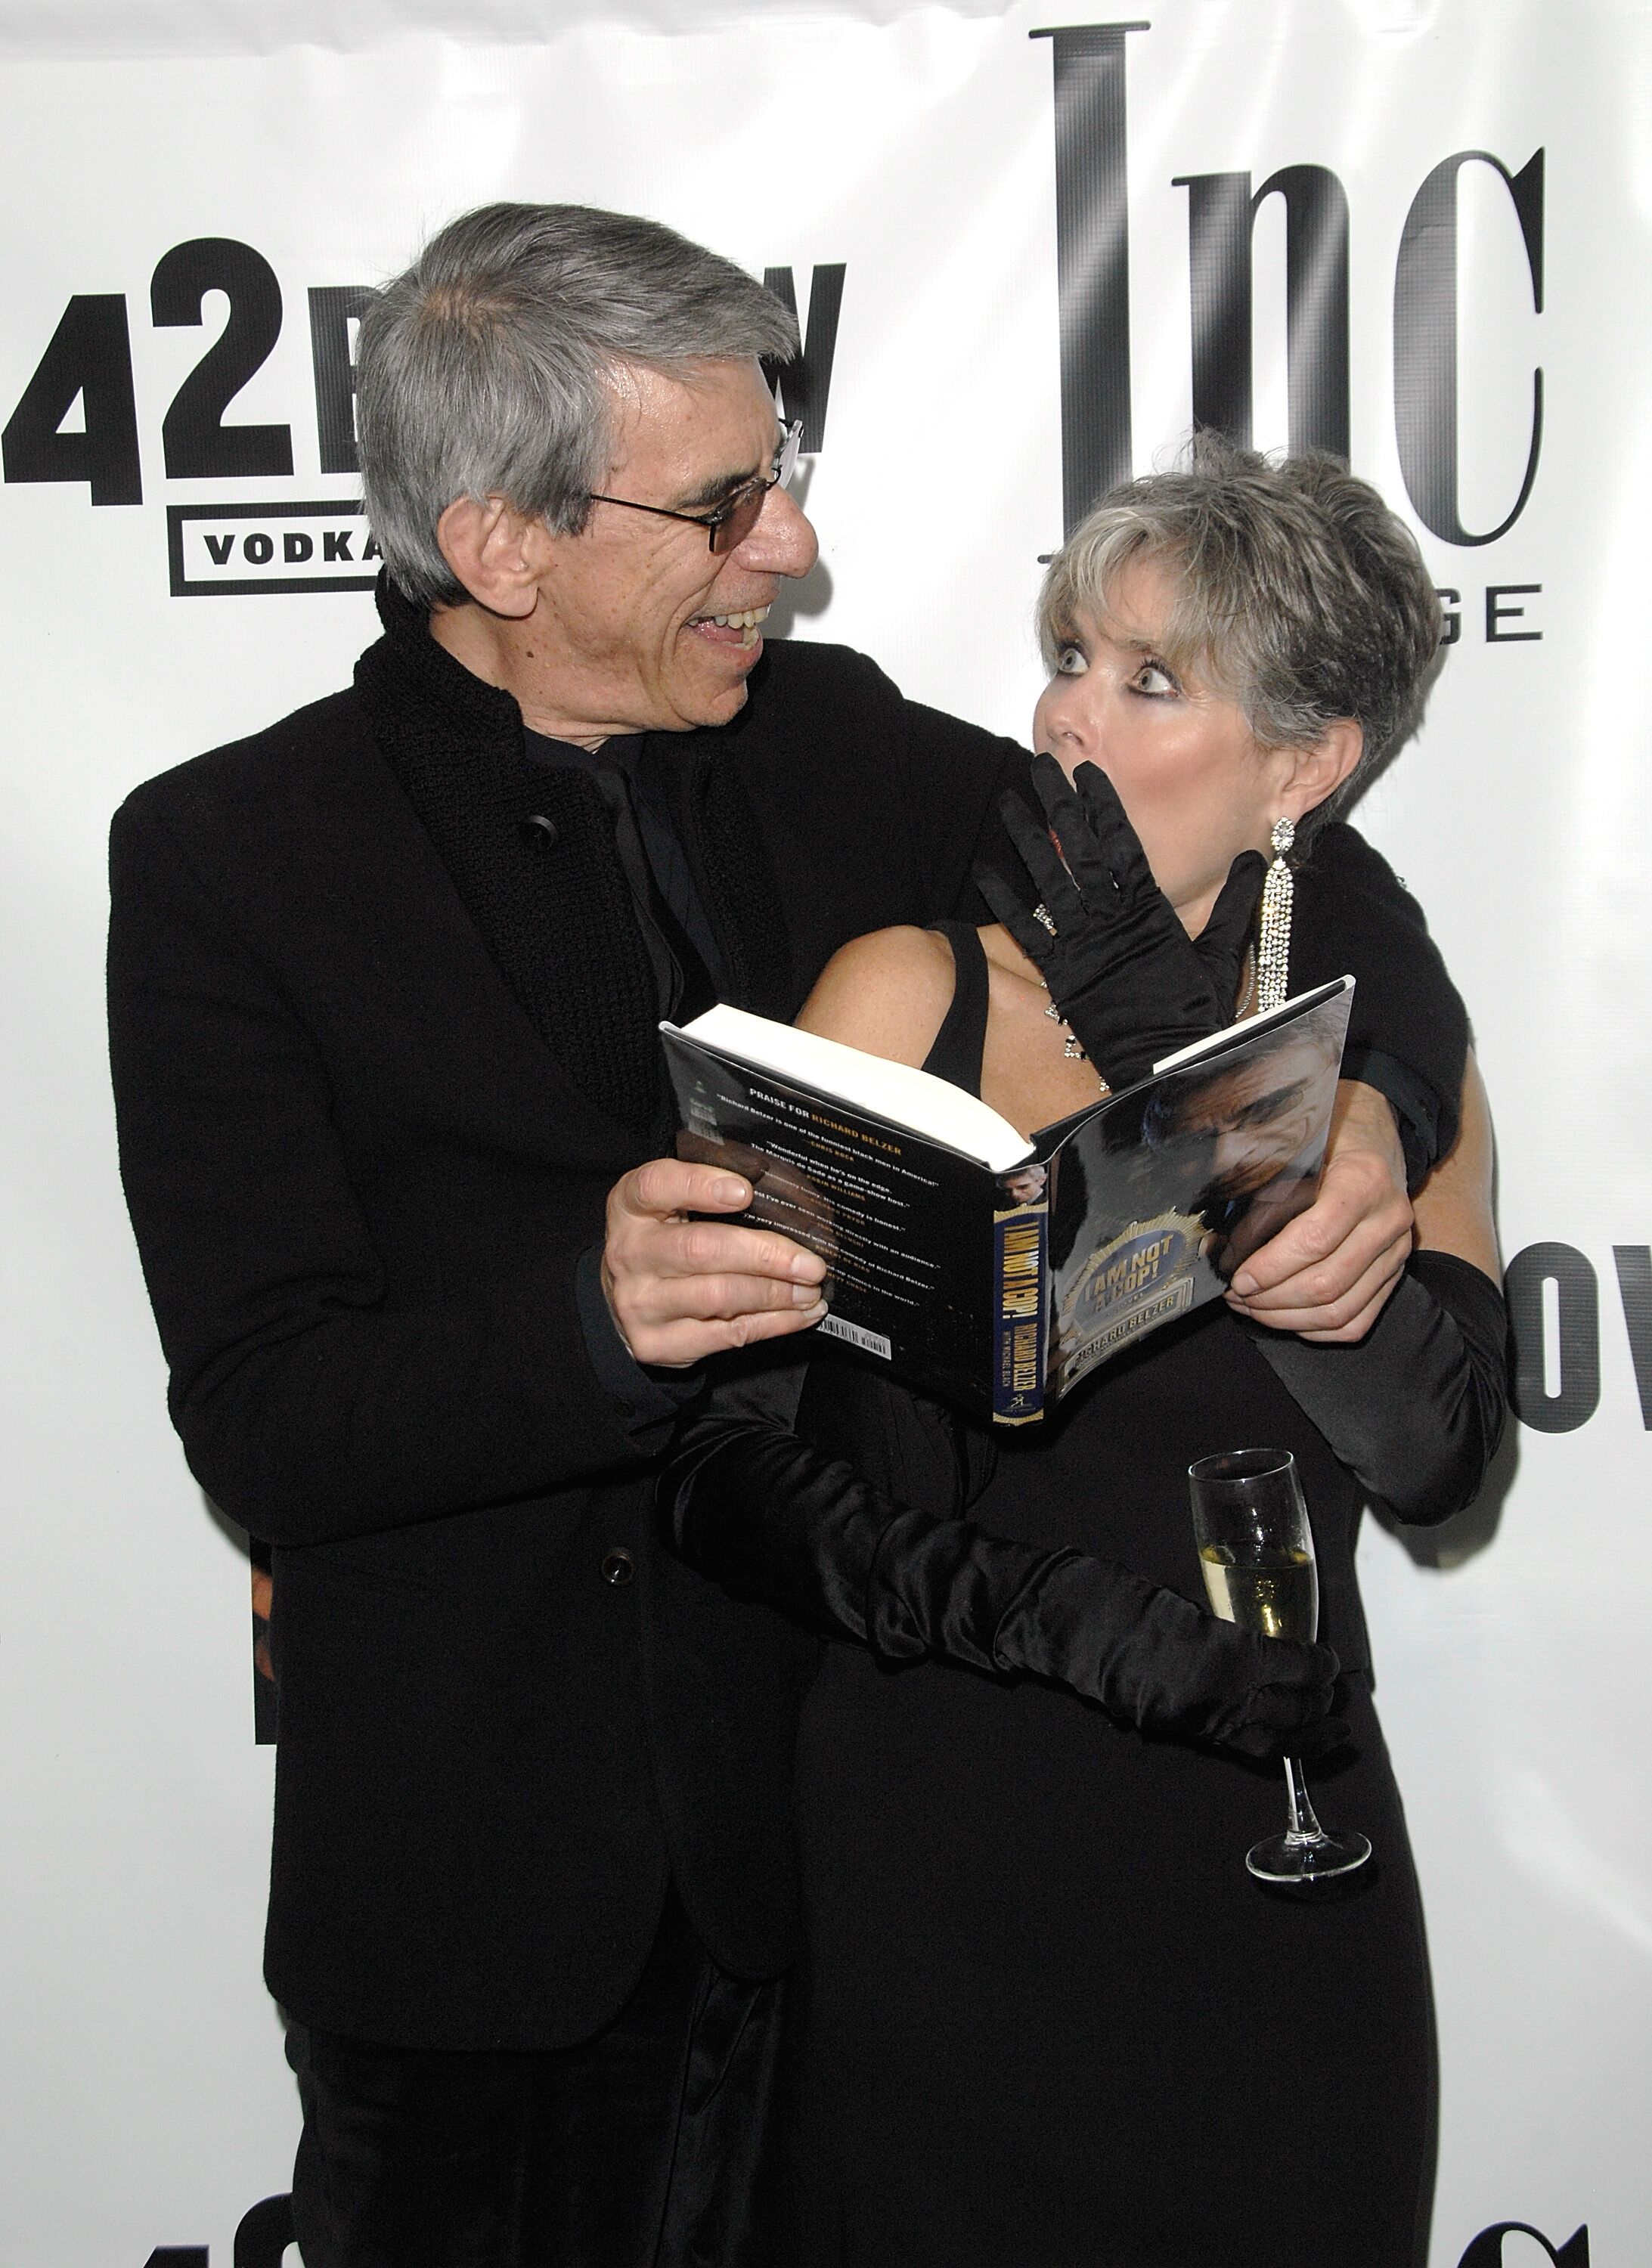 Richard Belzer and wife, Harlee McBride attend the book launch celebration for Richard Belzer's "I Am Not A Cop!" | Source: Getty Images